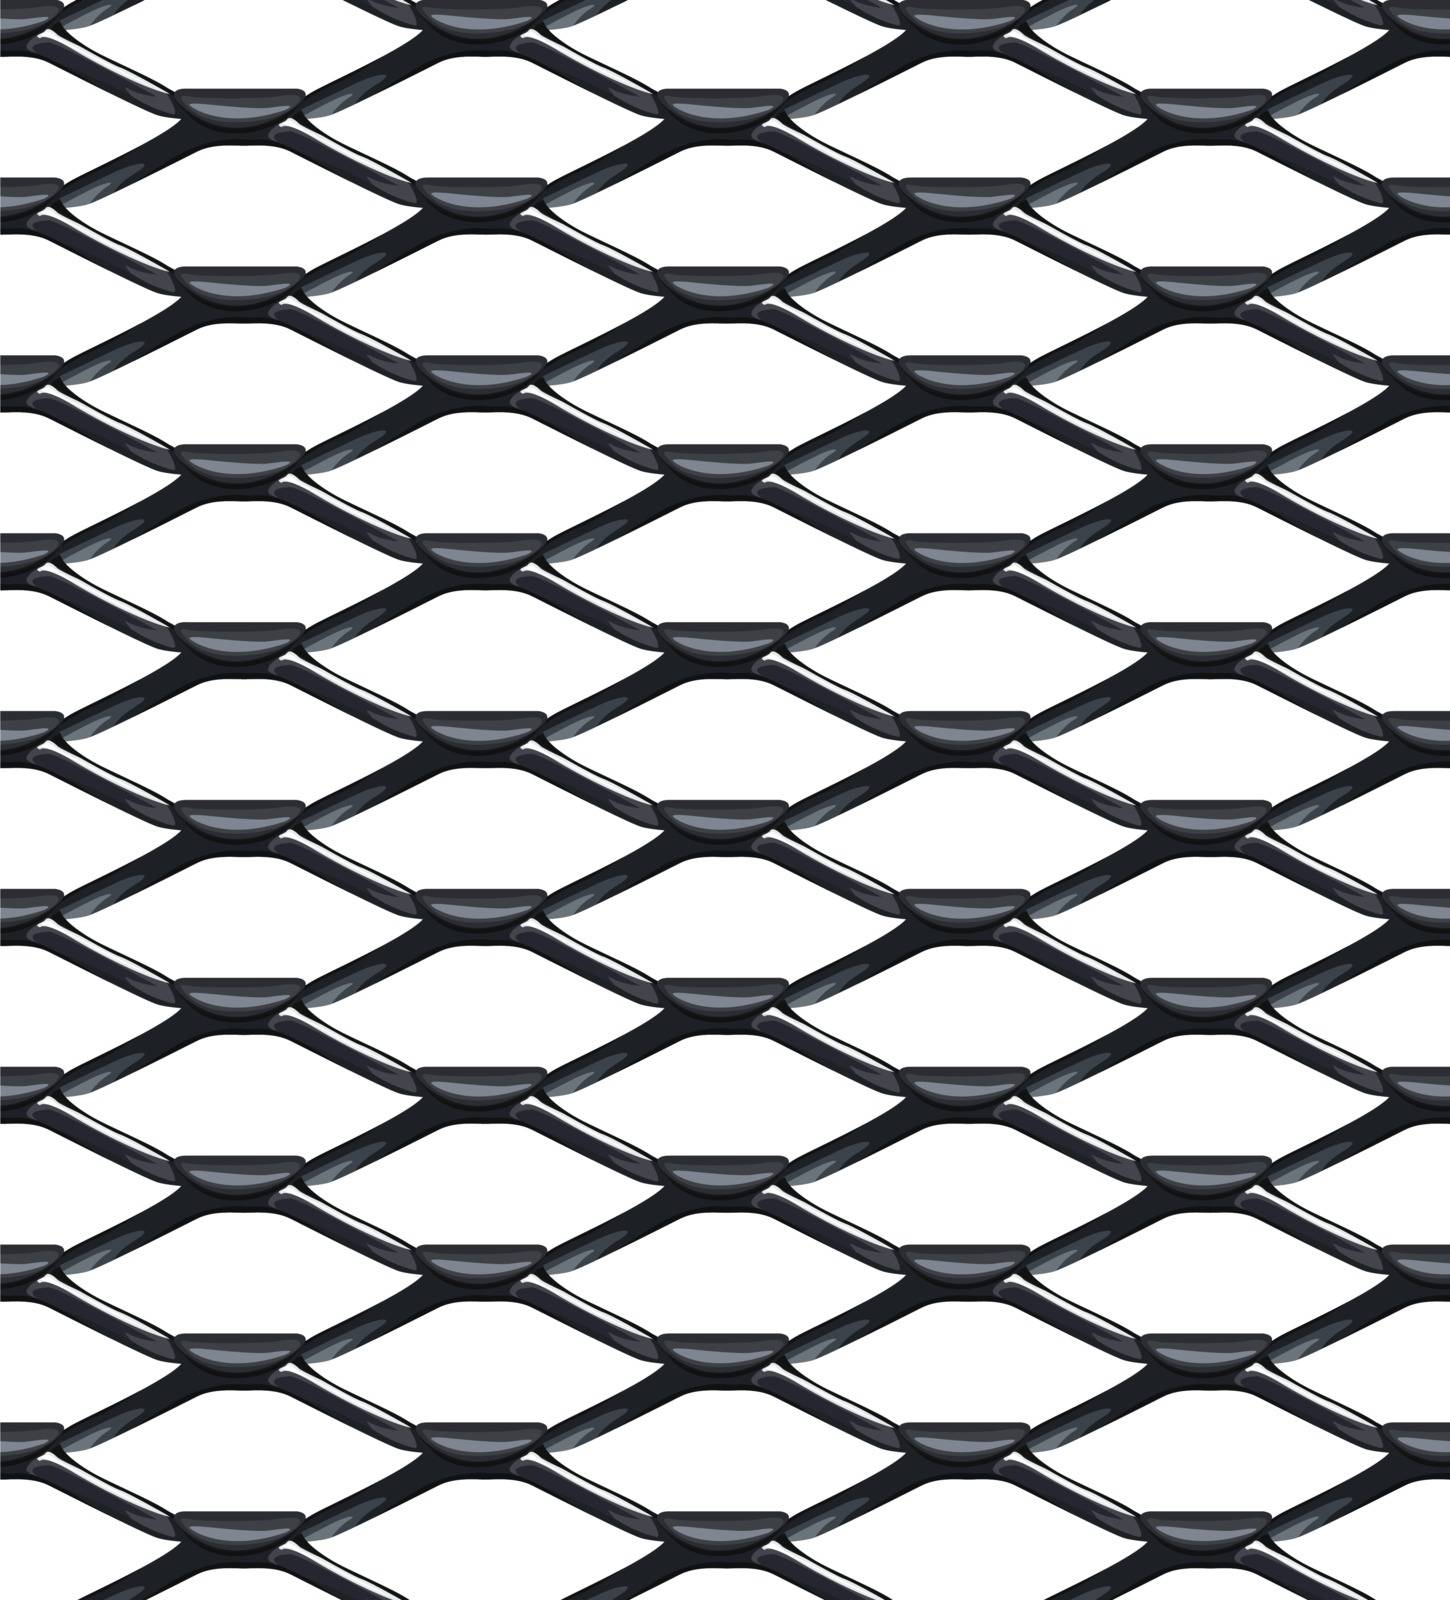 Steel mesh vector background by ayax